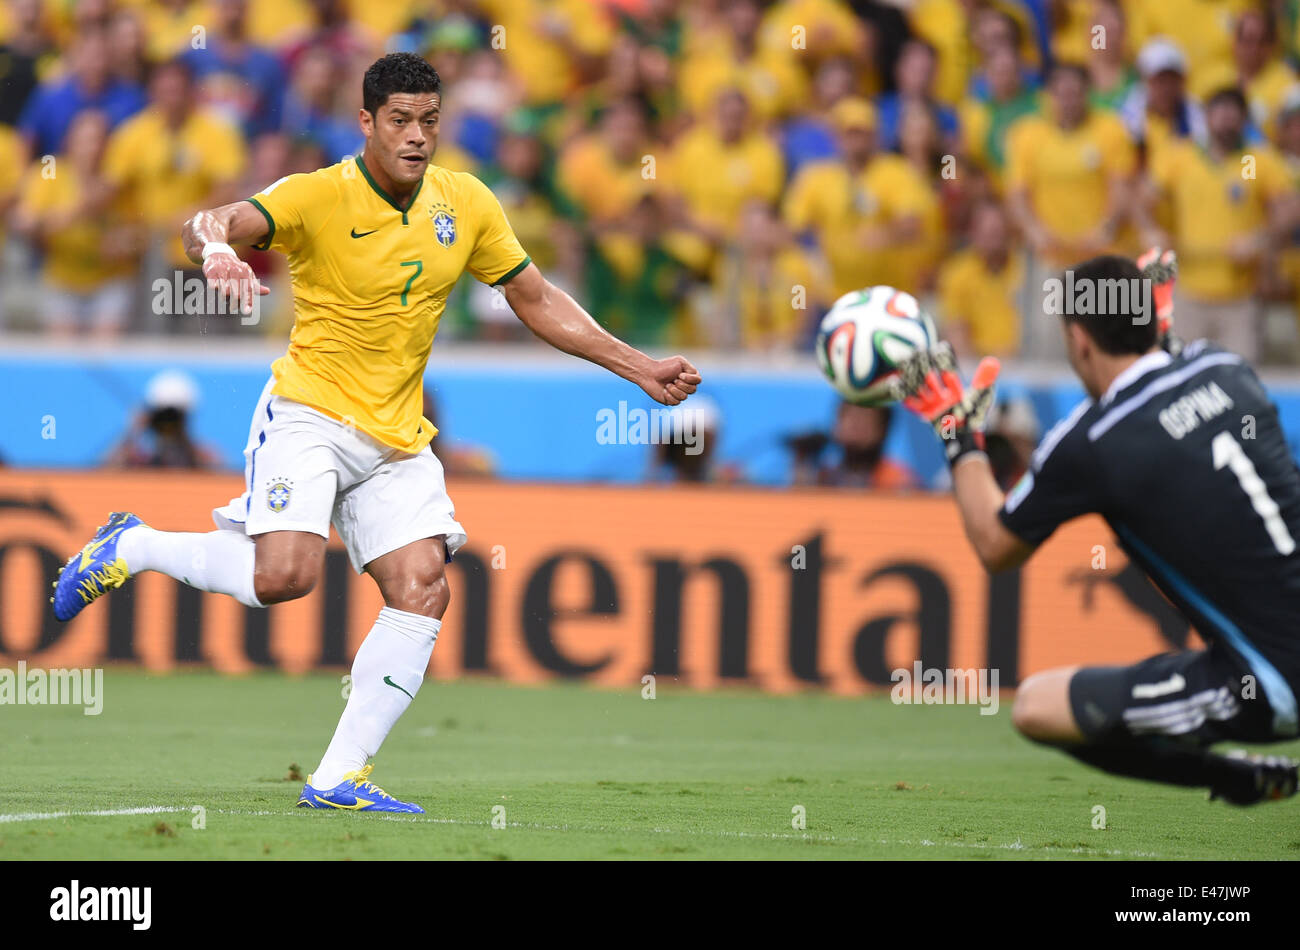 Fortaleza, Brazil. 04th July, 2014. Hulk (L) of Brazil tries to scroe against goalkeeper David Ospina of Colombia during the FIFA World Cup 2014 quarter final match soccer between Brazil and Colombia at the Estadio Castelao in Fortaleza, Brazil, 04 July 2014. Photo: Marius Becker/dpa/Alamy Live News Stock Photo